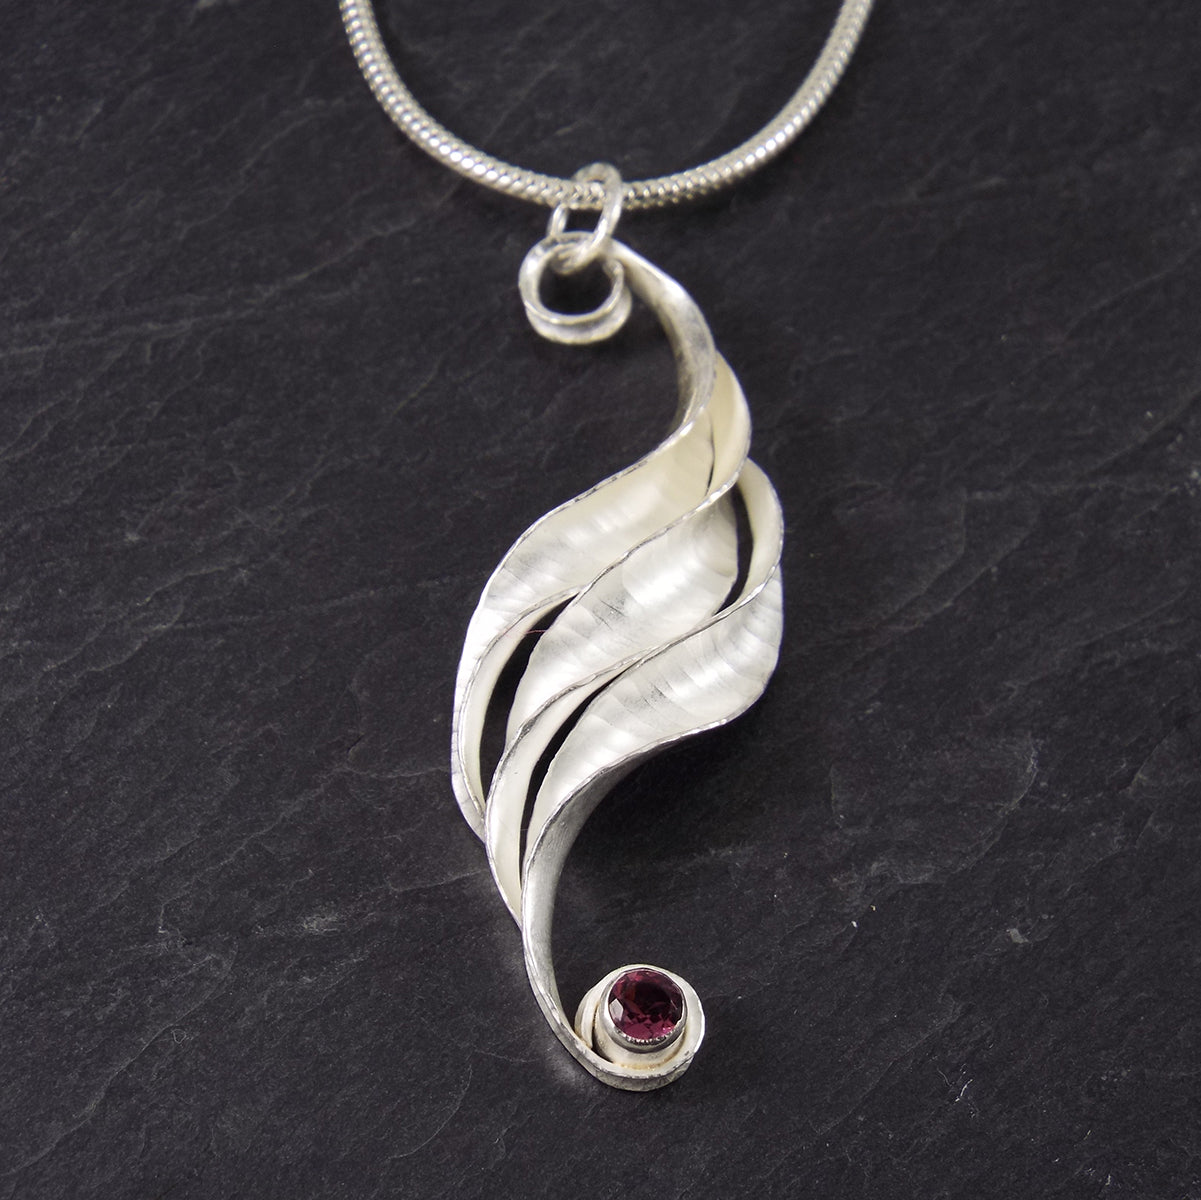 A silver wave necklace, handmade, composed of three curled and twisted units, the top one ending in a loop for the chain and the bottom one curled around a 3mm rhodolite garnet, faceted, magenta. The three units are arranged so that they form a progression.